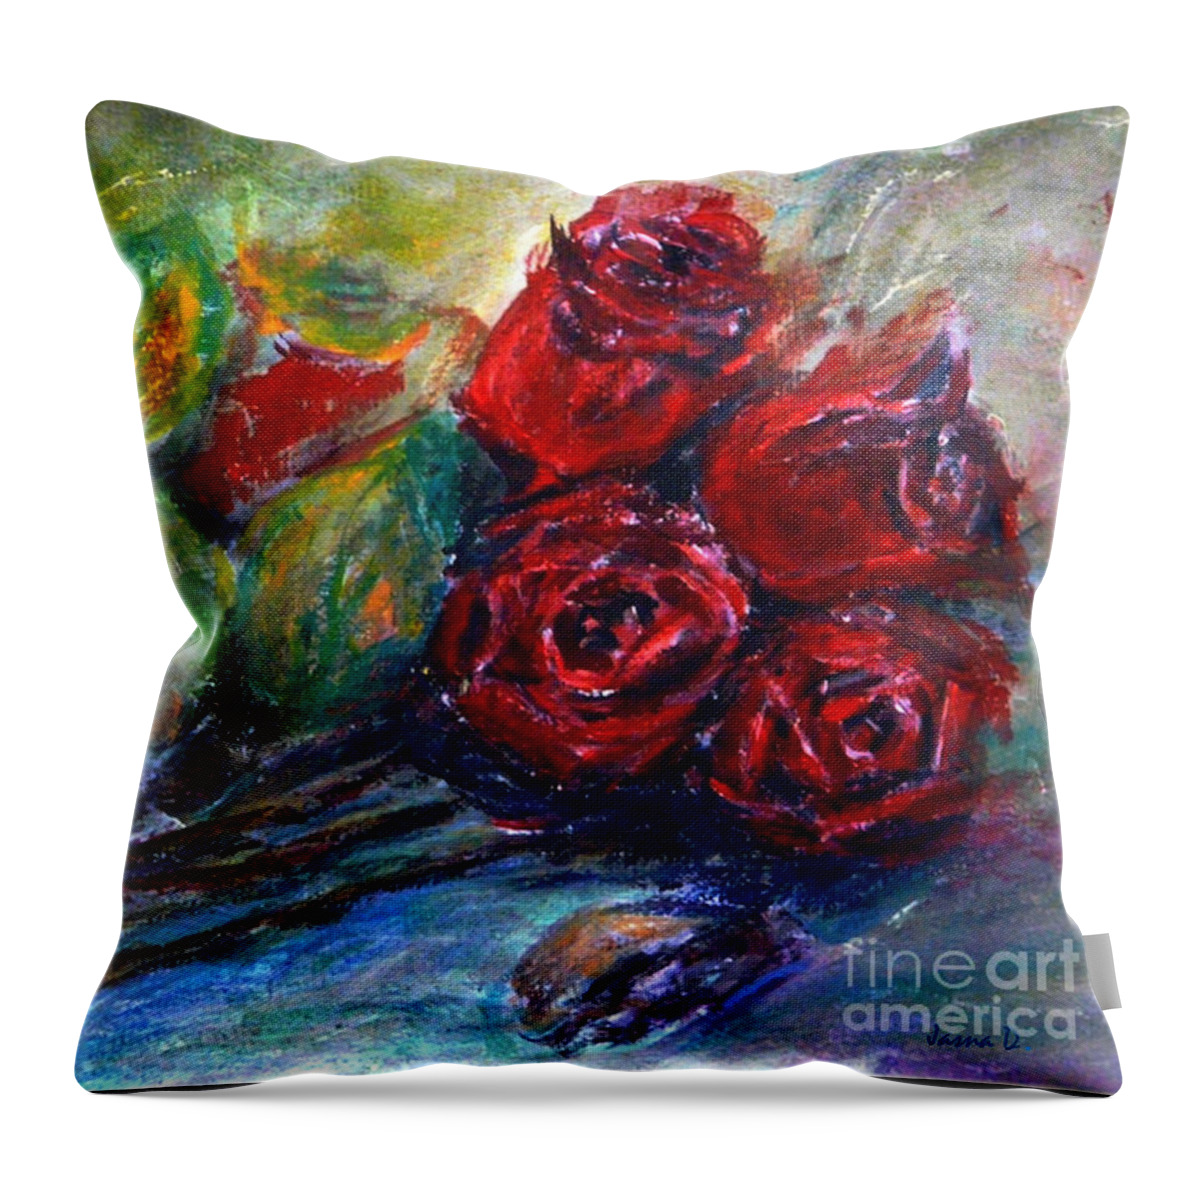 Roses Throw Pillow featuring the painting Roses by Jasna Dragun